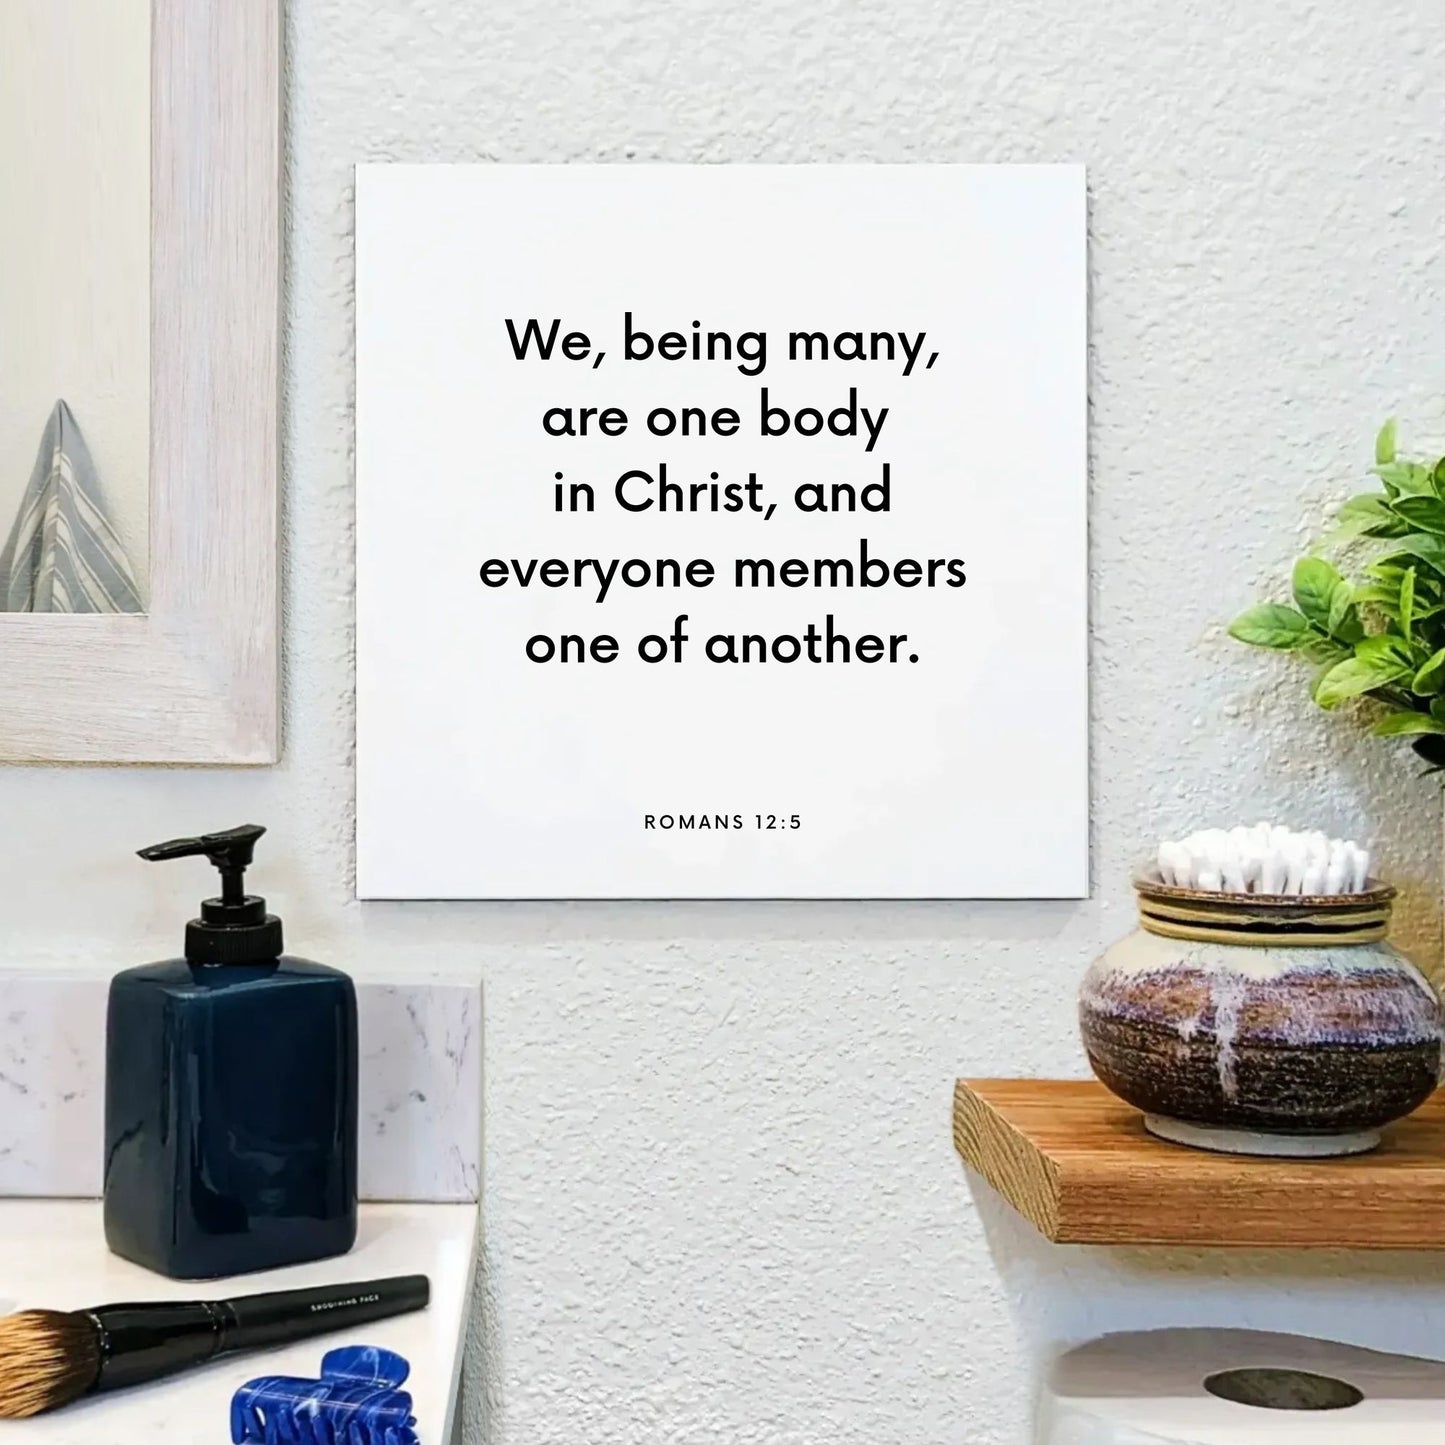 Bathroom mouting of the scripture tile for Romans 12:5 - "We, being many, are one body in Christ"